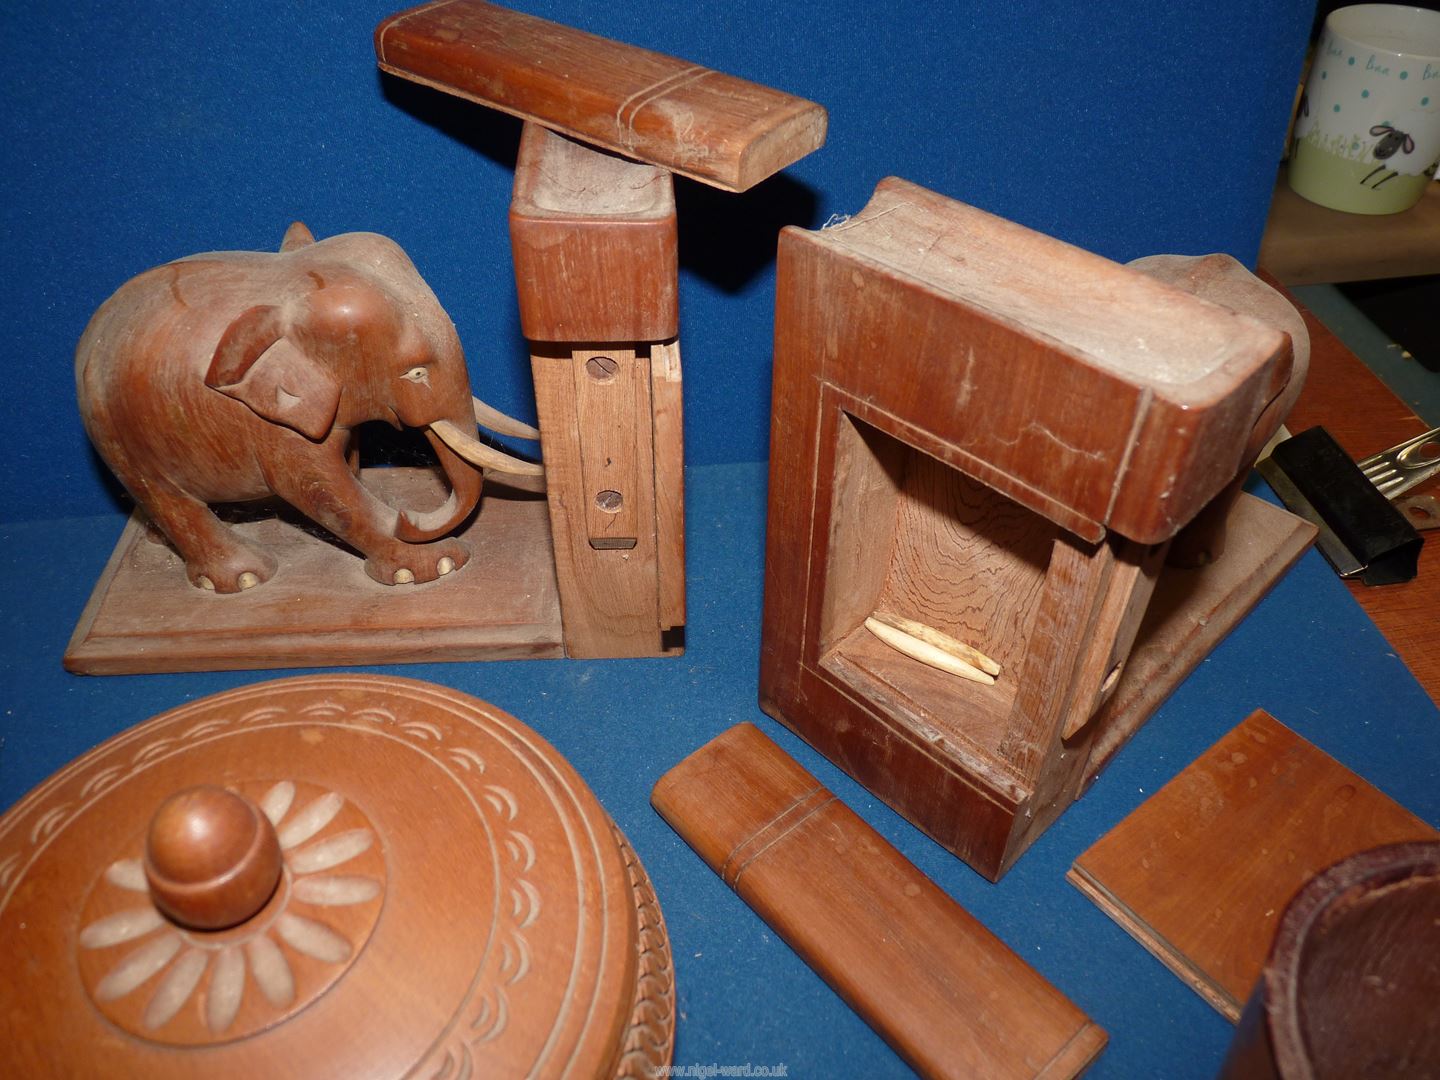 A quantity of miscellanea and Treen including a quill box, Gourd, polisher, leather coated beaker, - Image 2 of 3